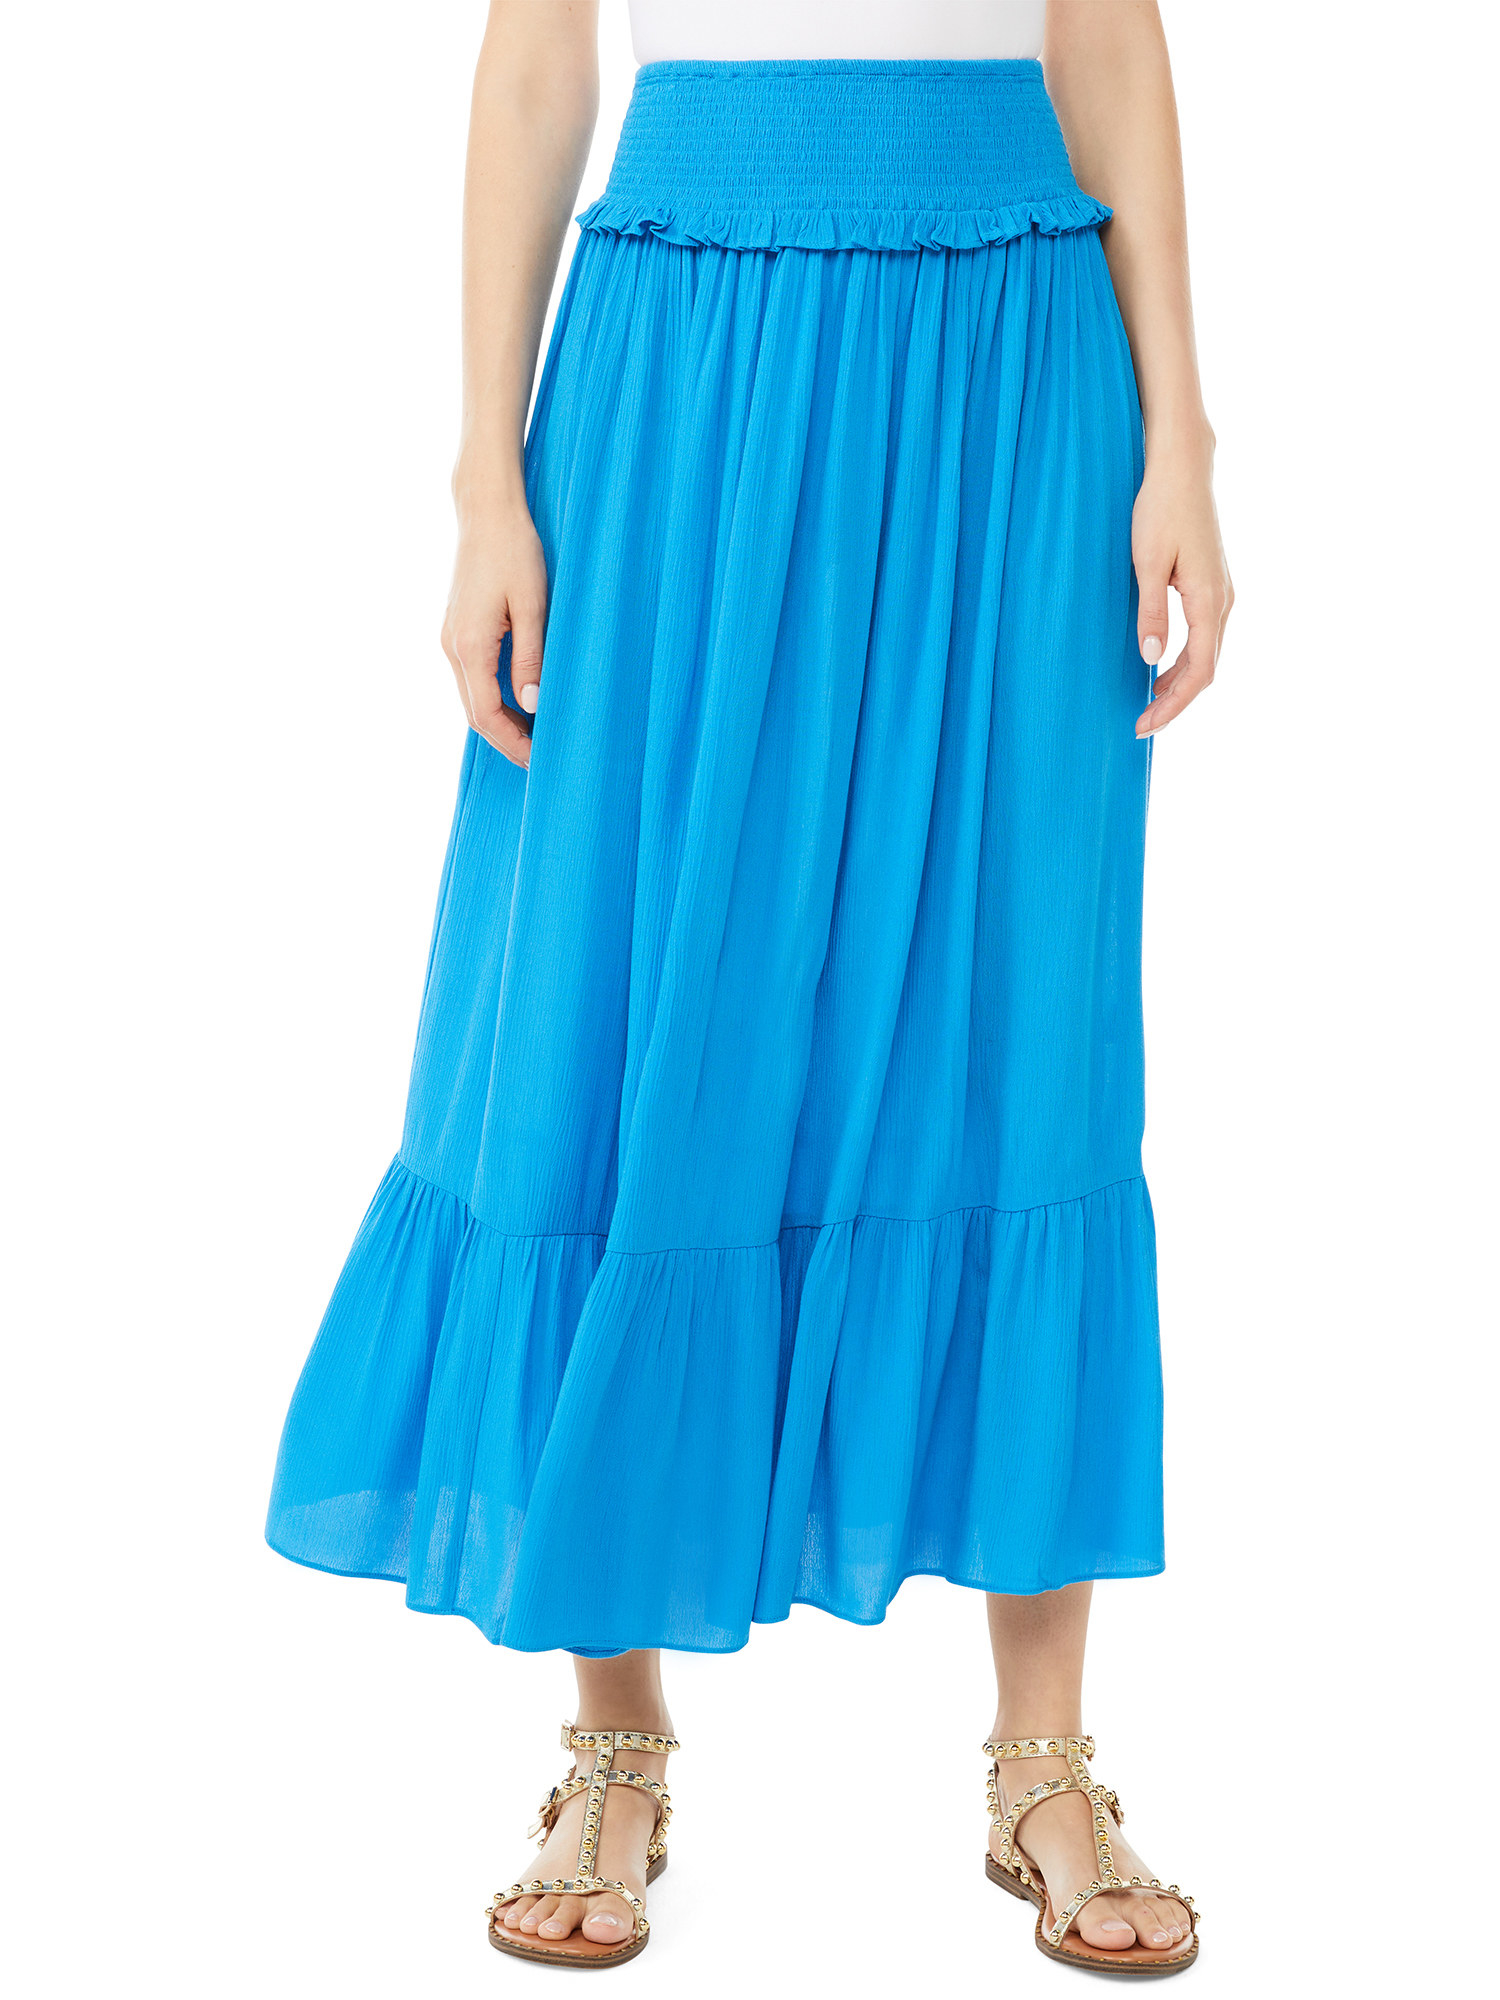 Model wearing the French blue tiered maxi skirt